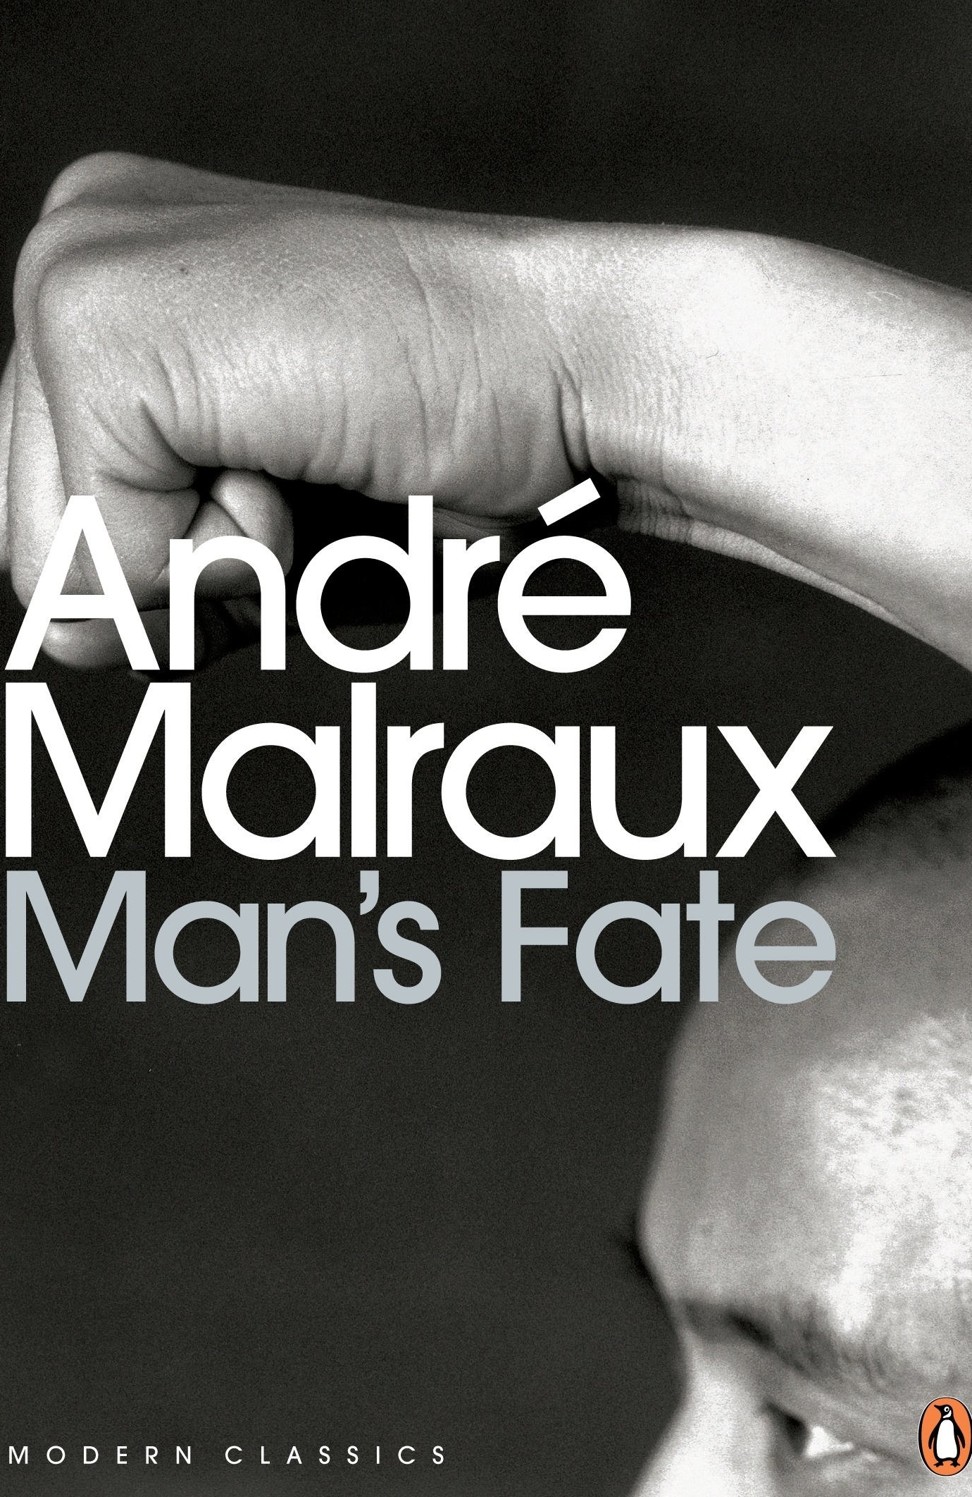 Man's Fate, by Andrew Malraux.